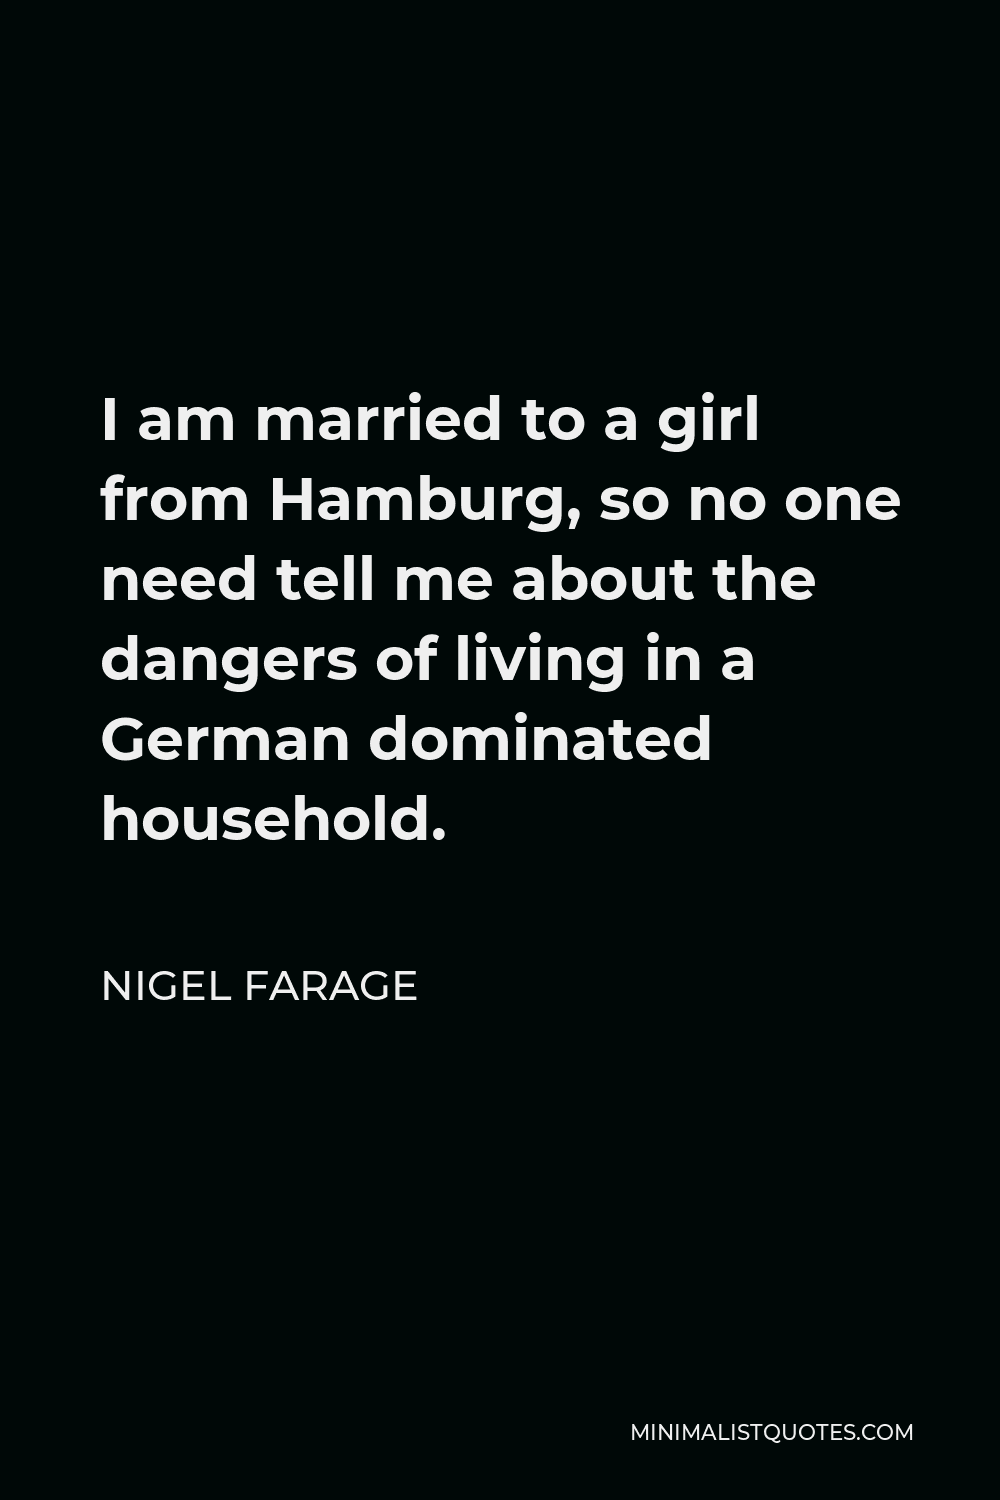 Nigel Farage Quote - I am married to a girl from Hamburg, so no one need tell me about the dangers of living in a German dominated household.